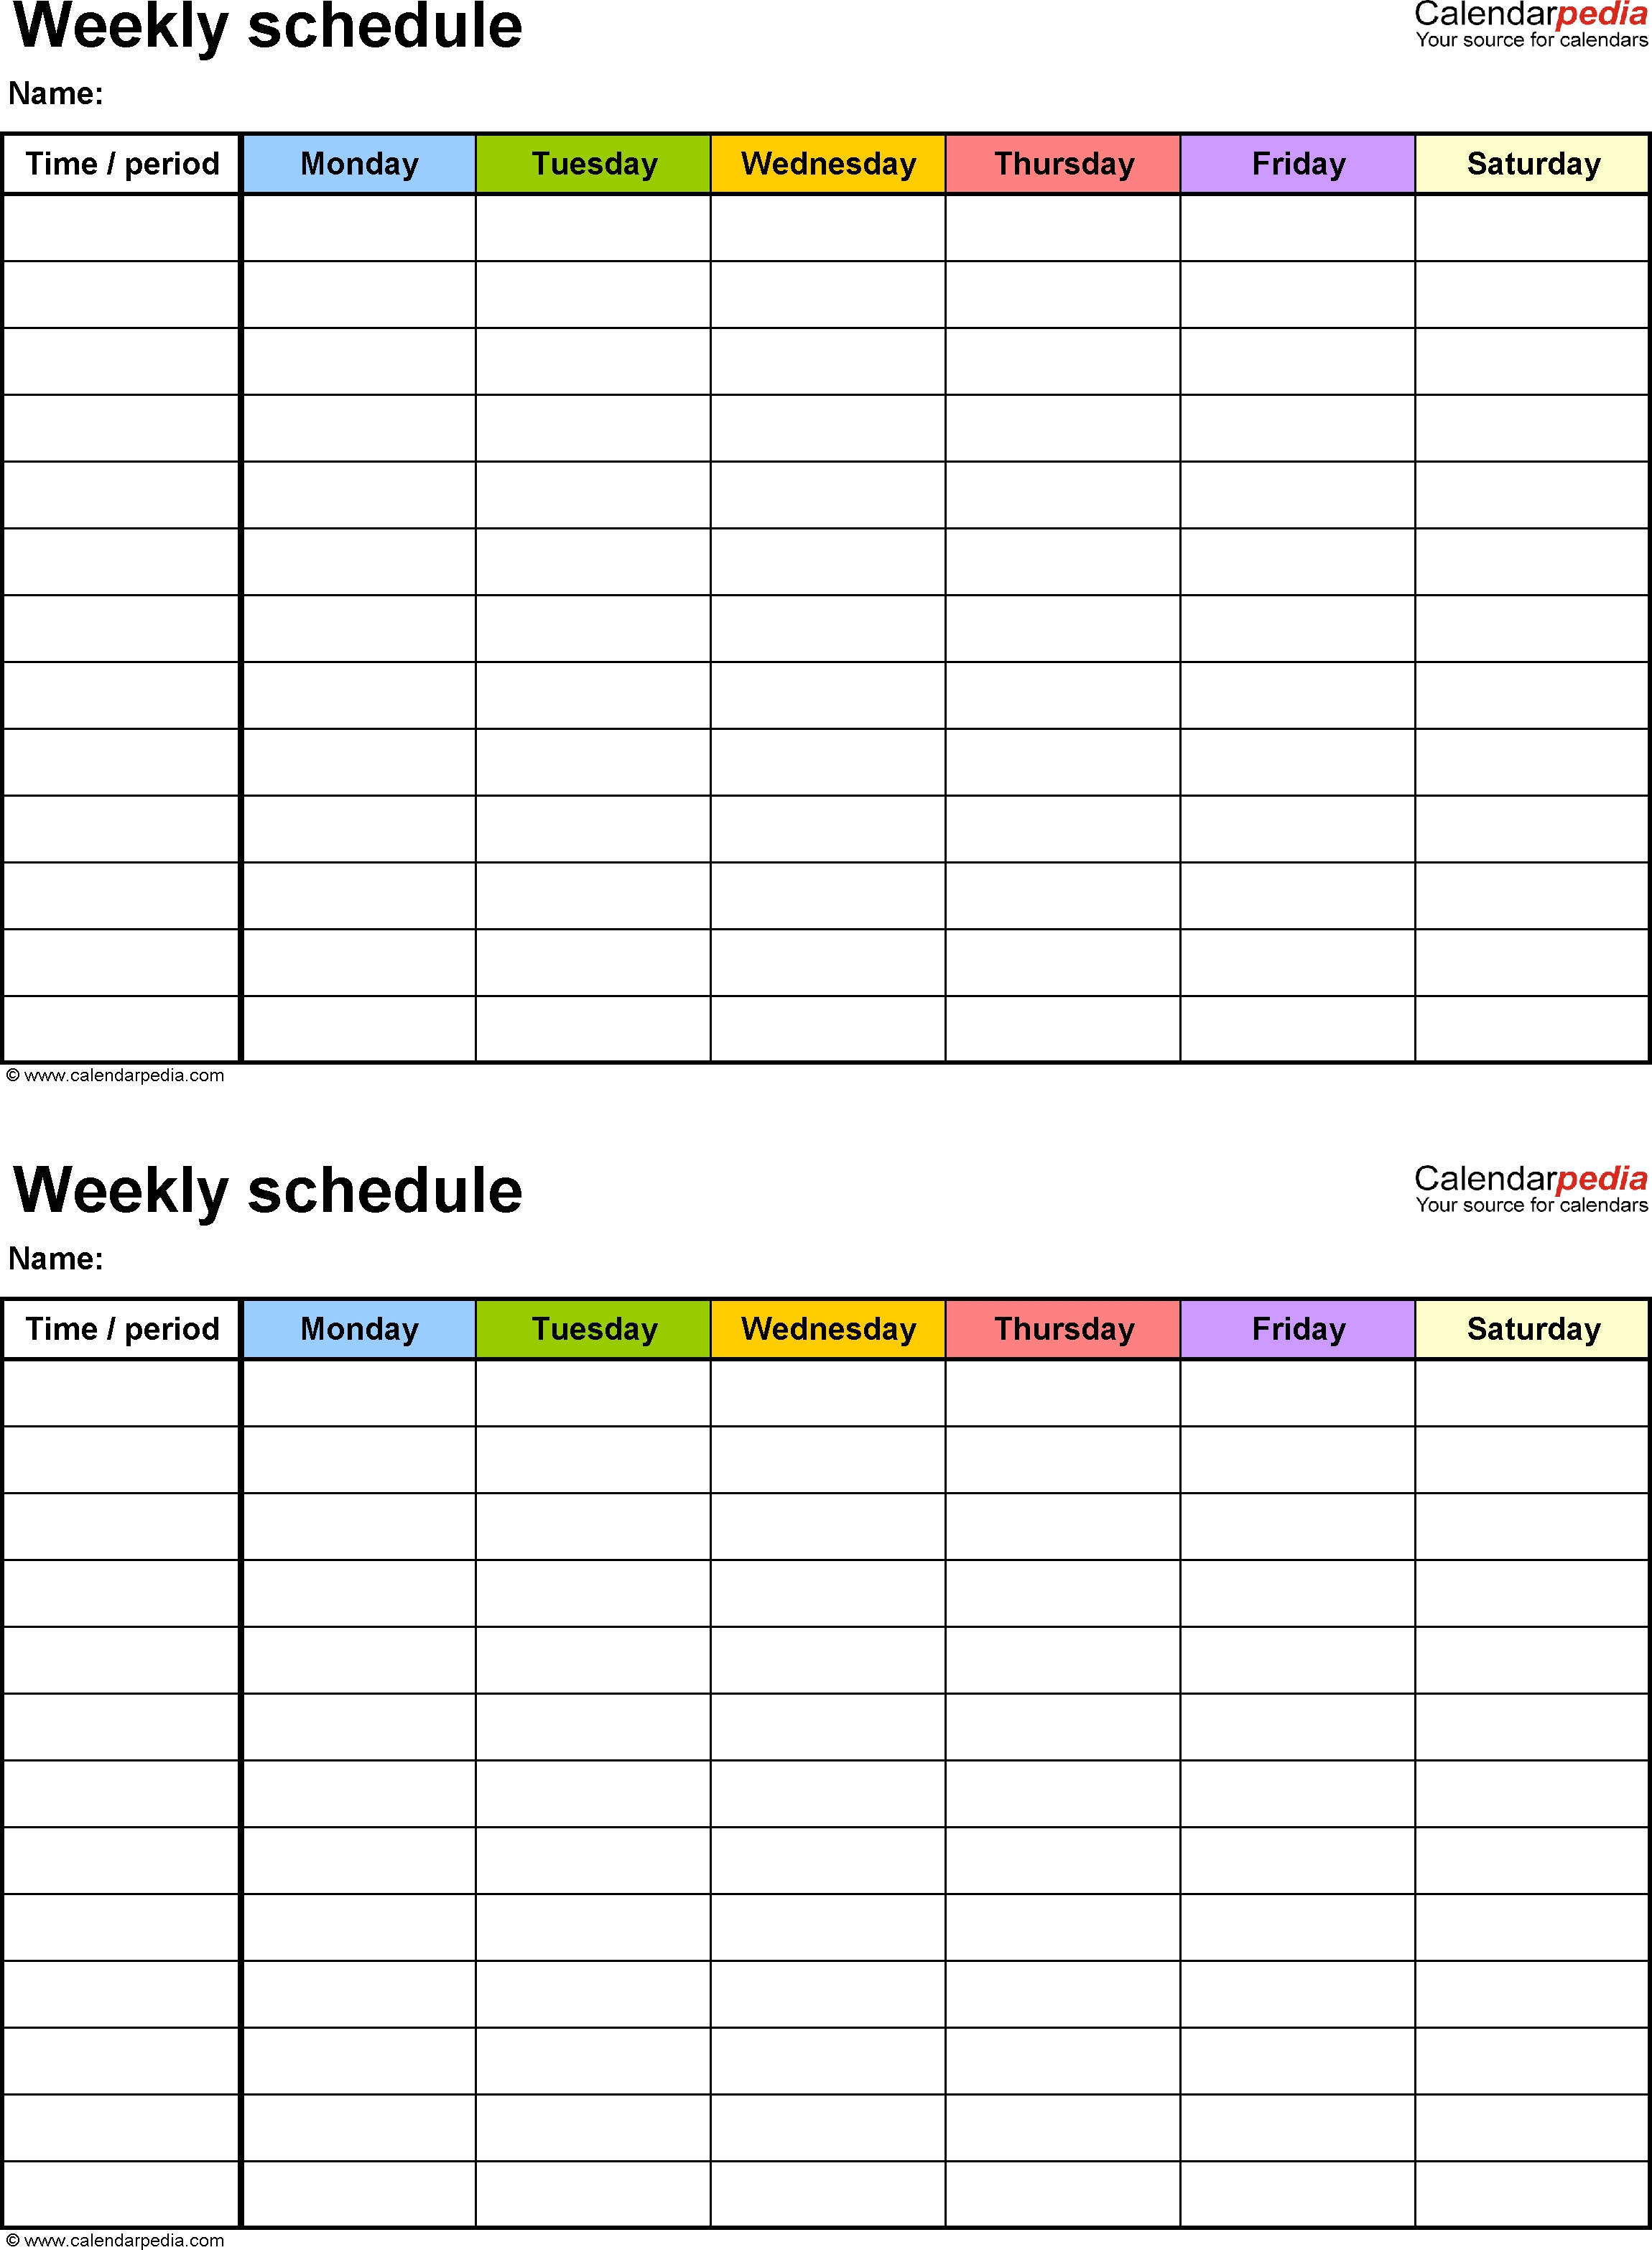 Free Weekly Schedule Templates For Excel - 18 Templates regarding Plan Calendar Template For 6 Weeks